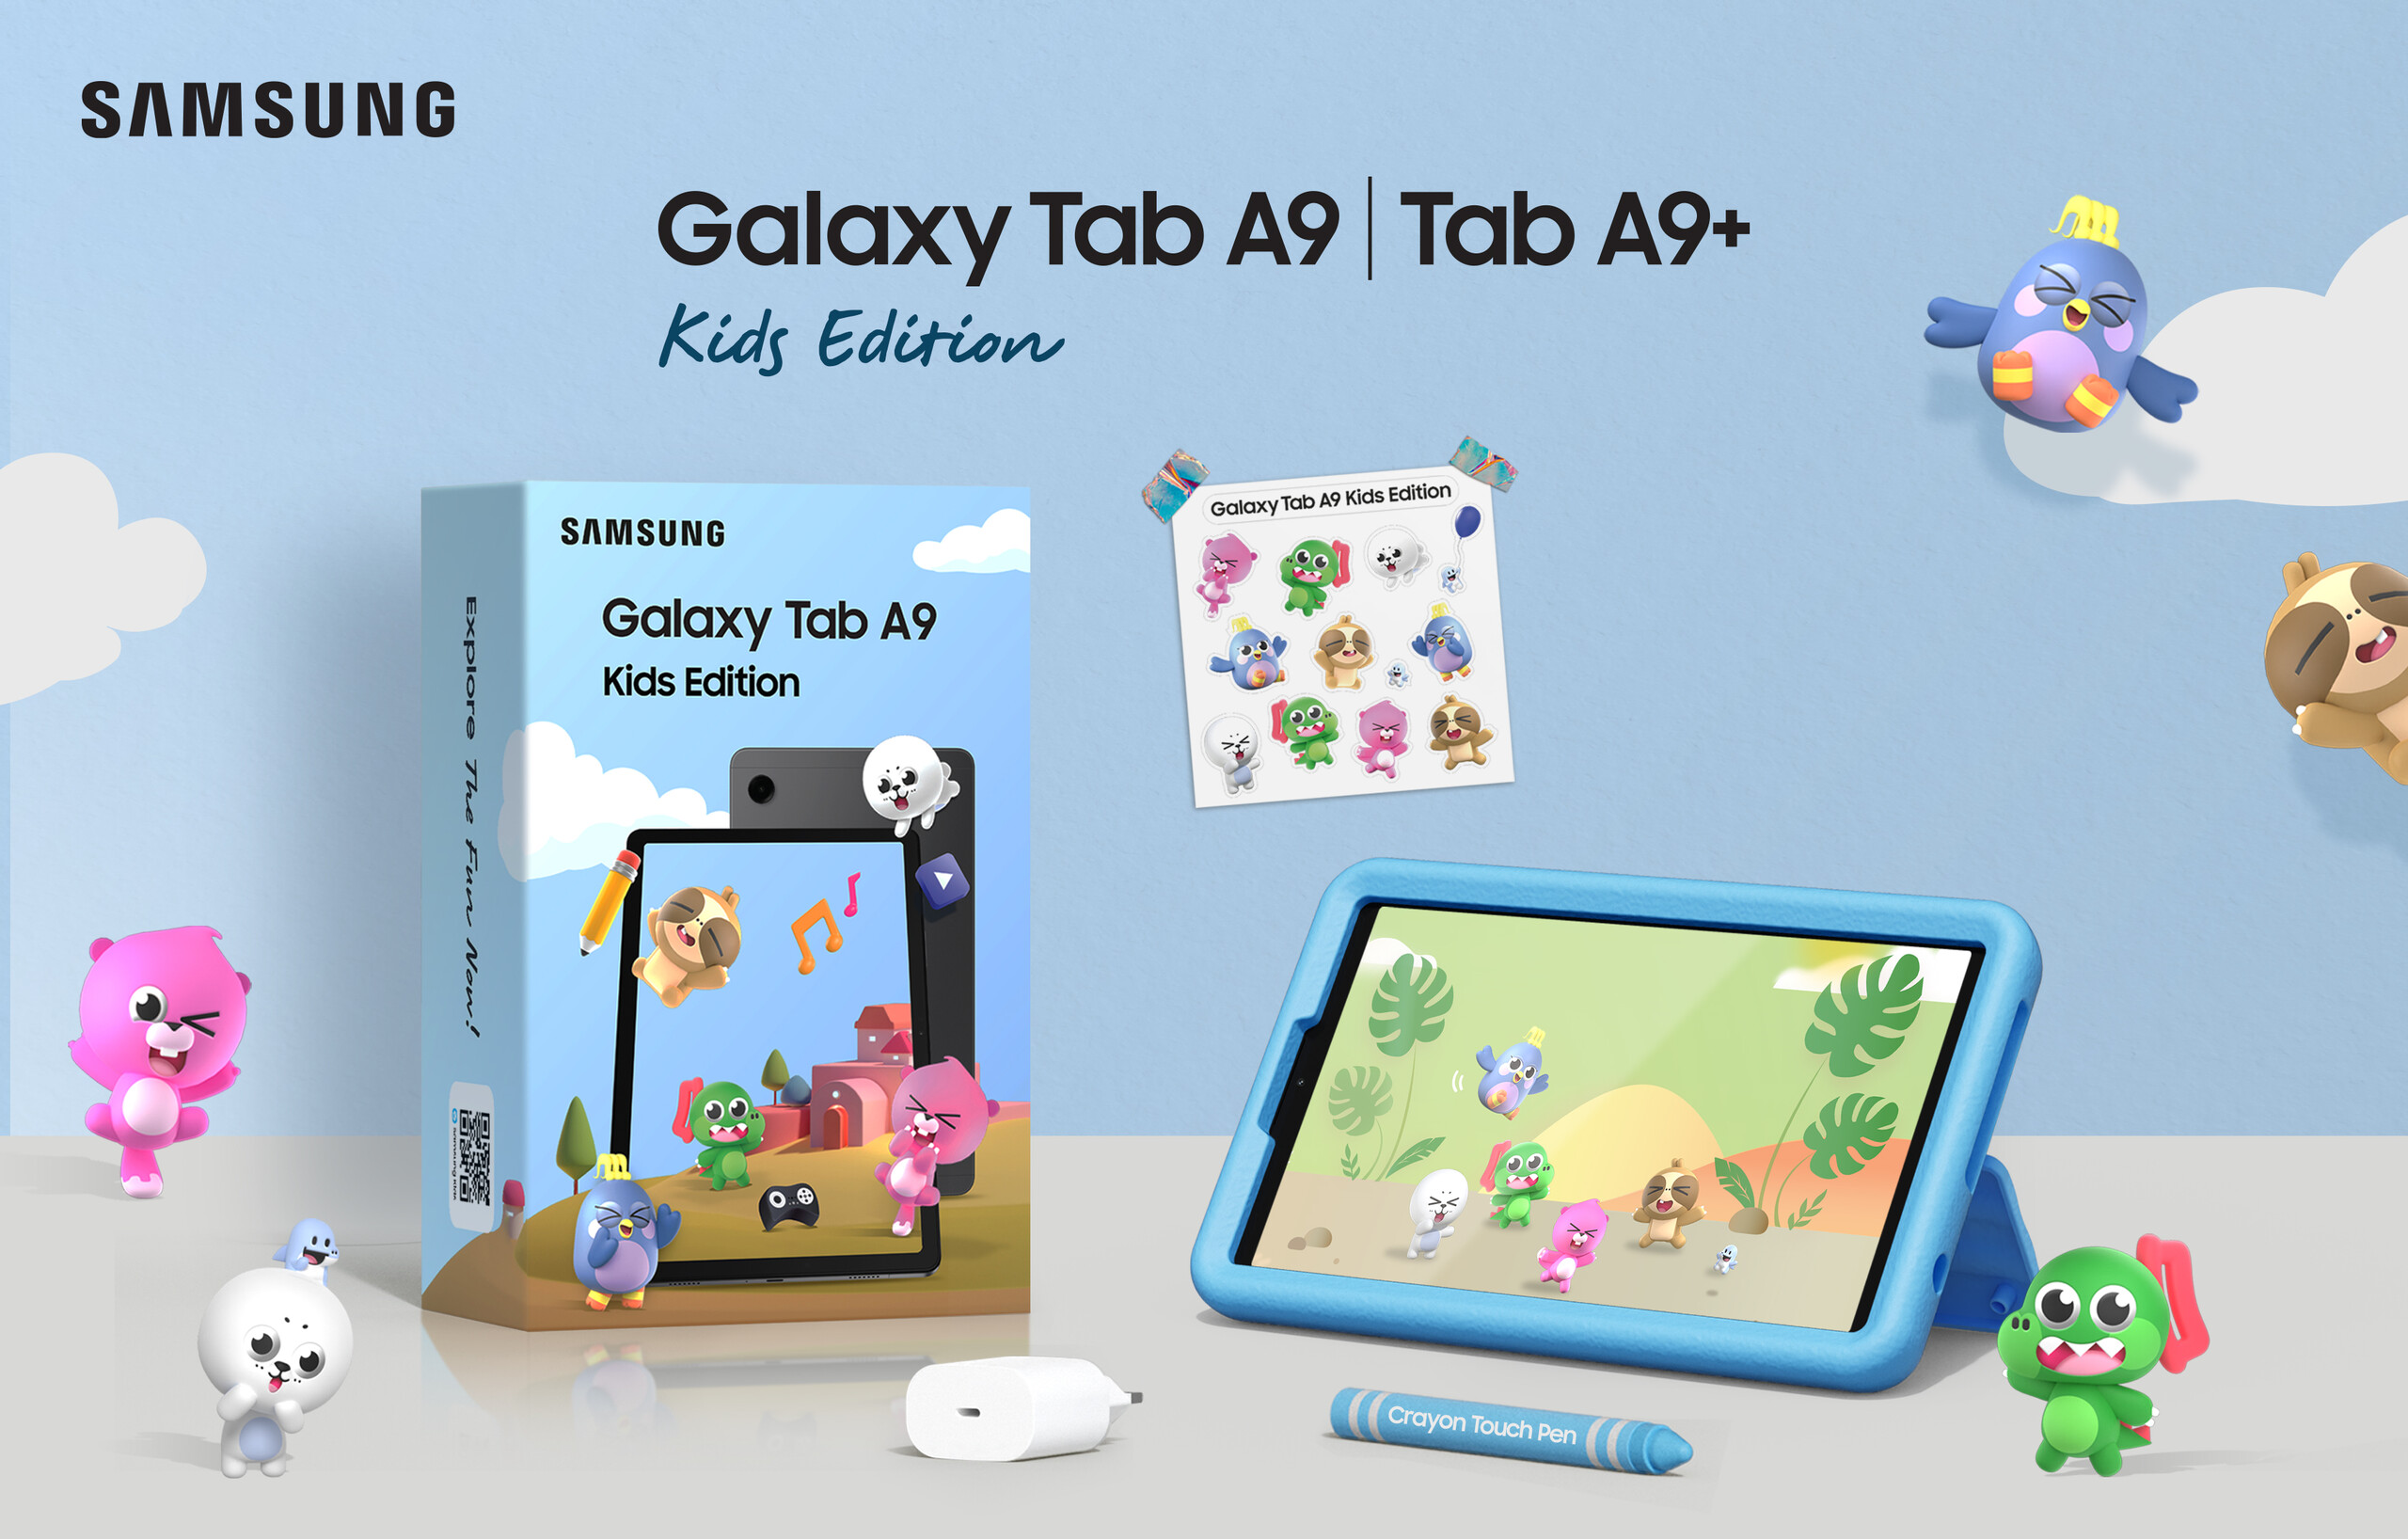 Samsung continues its iPad assault with the new Galaxy Tab A9